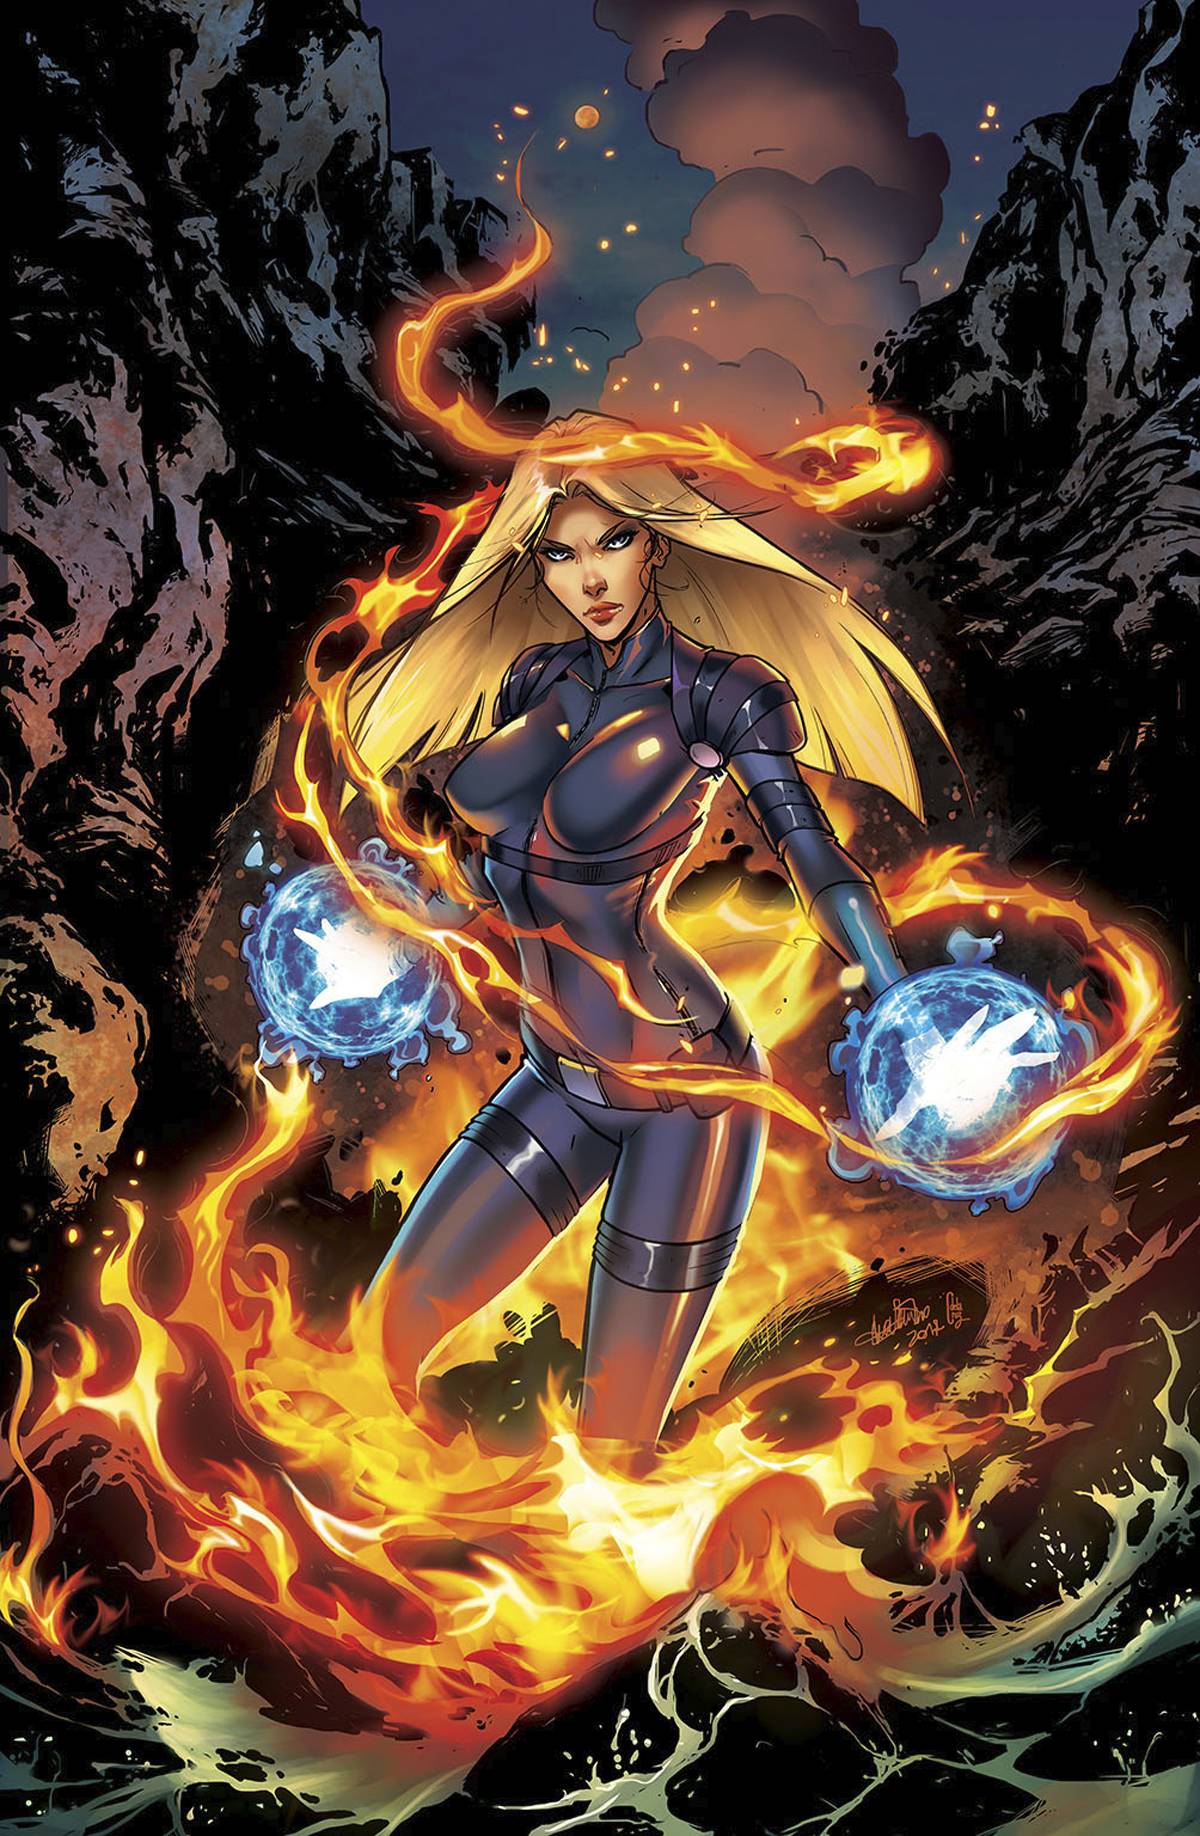 Grimm Fairy Tales on X: Revenge is the act of passion, vengeance